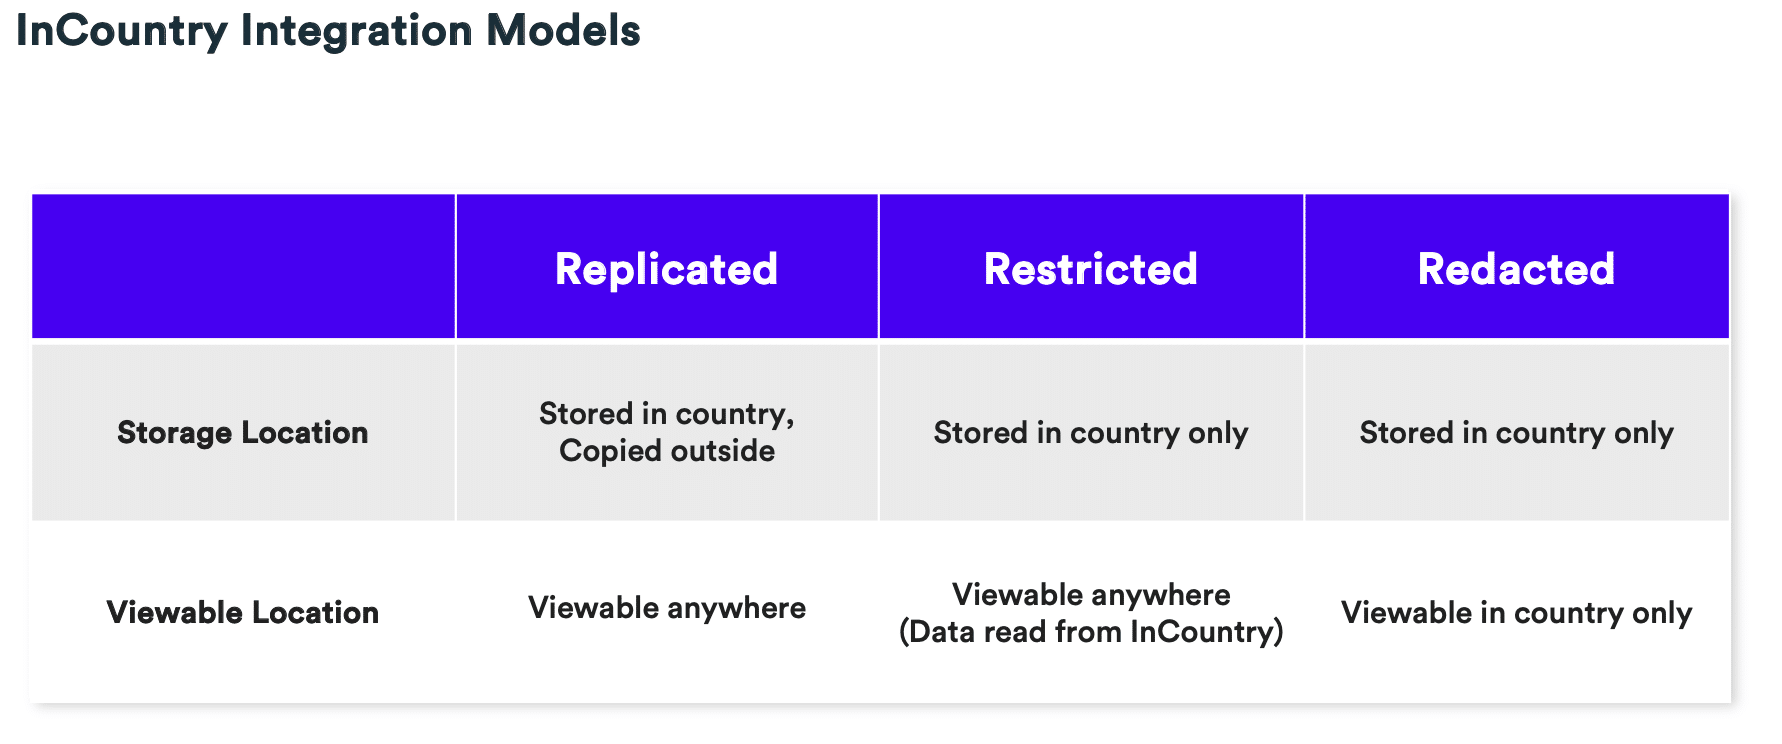 InCountry integration models